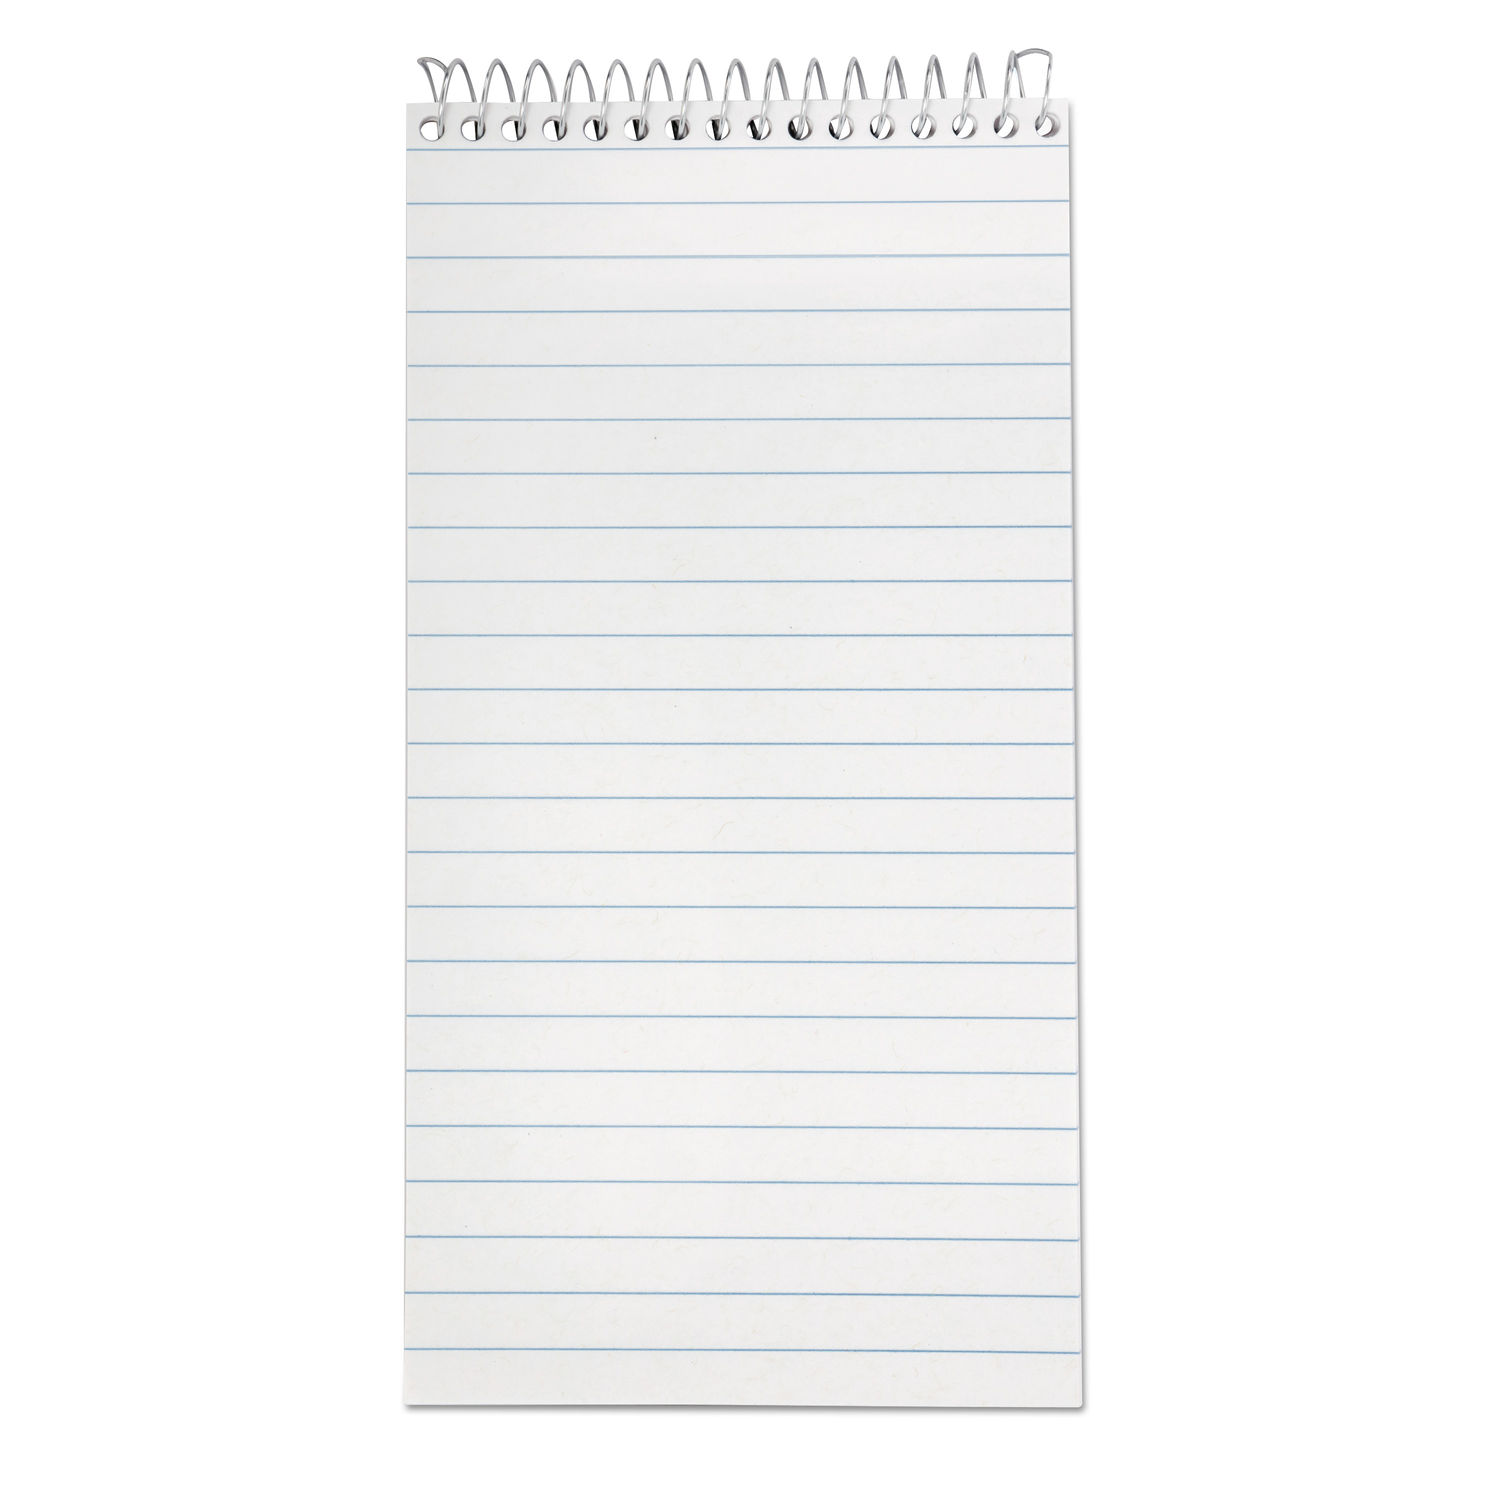 Earthwise by Ampad Recycled Reporter's Notepad Gregg Rule, White Cover, 70 White 4 x 8 Sheets